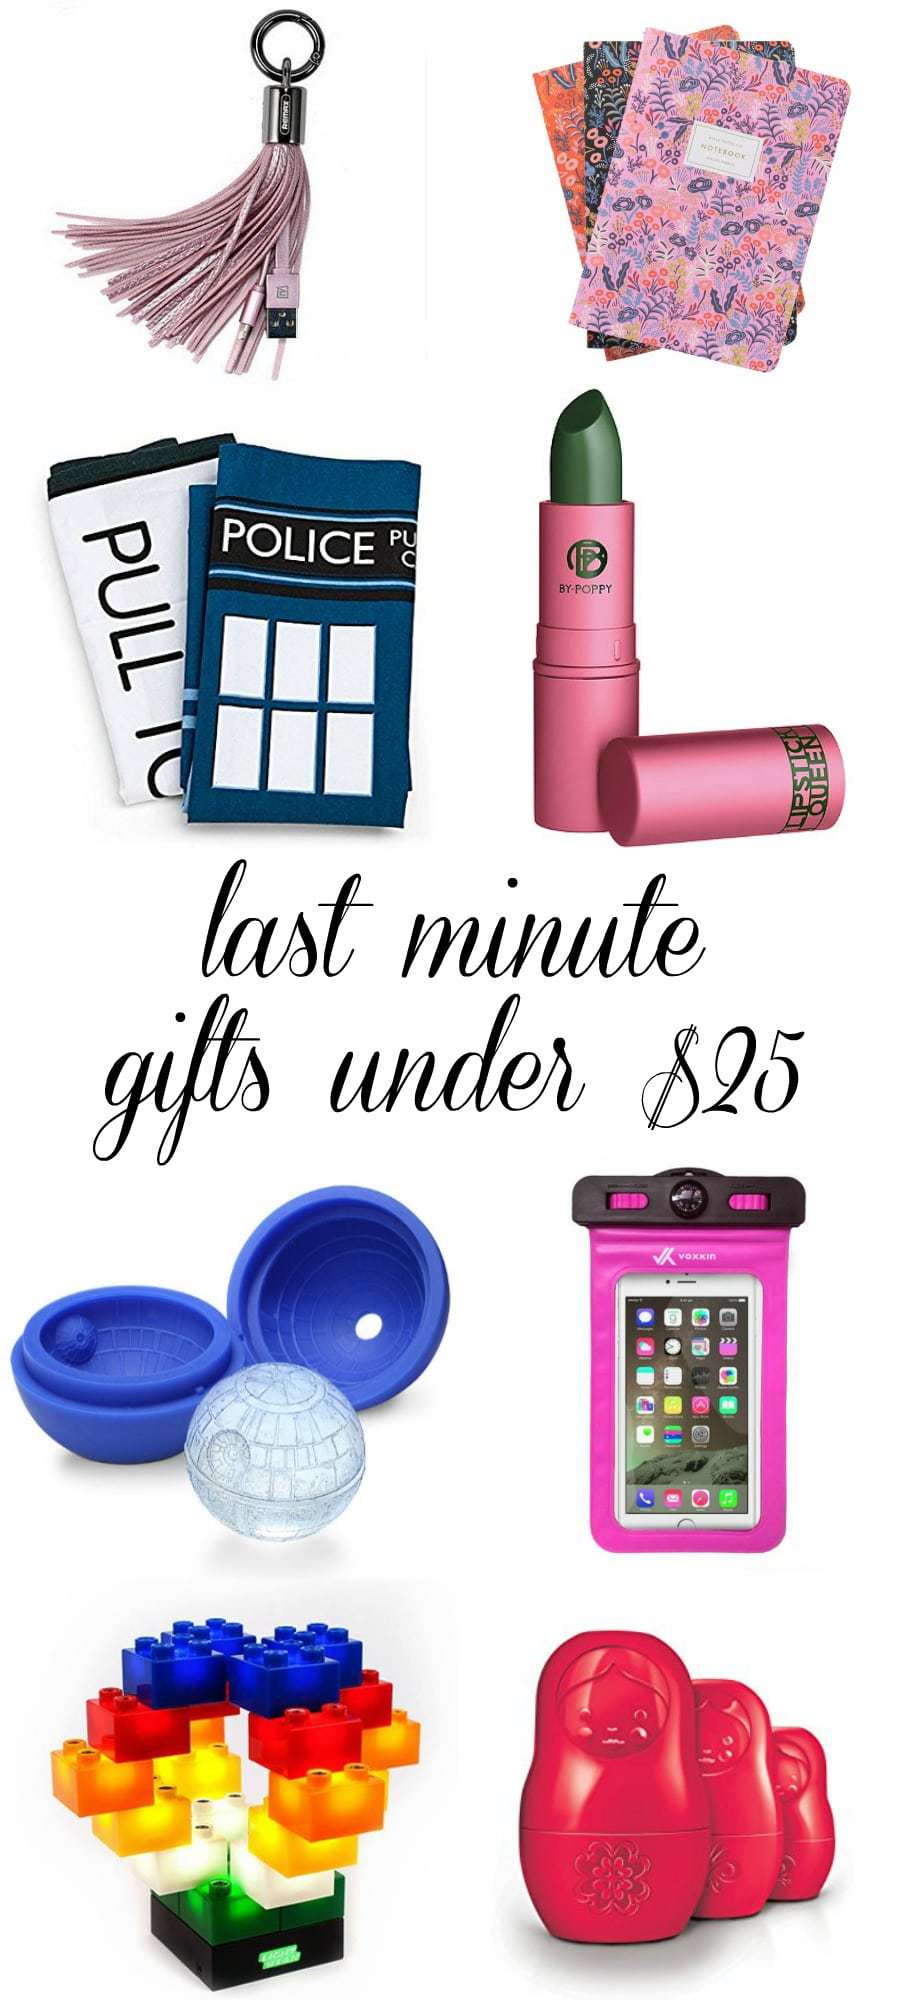 last minute gifts under $25